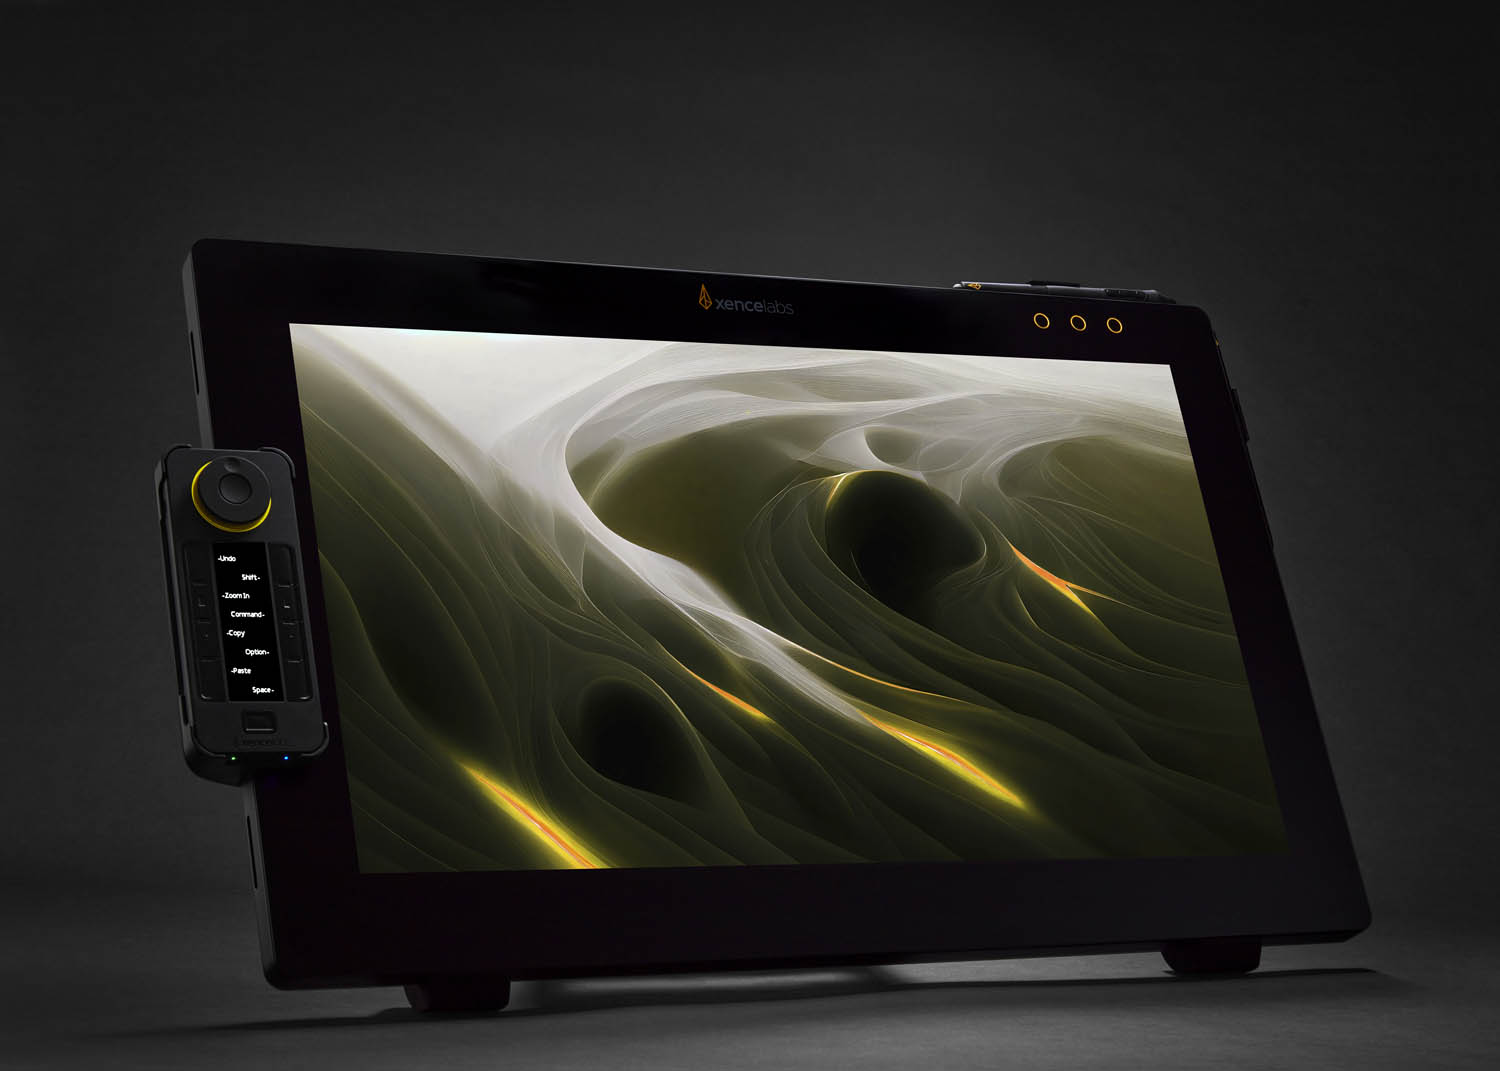 Xencelabs brings the fight to Wacom with feature-rich 4K pen display